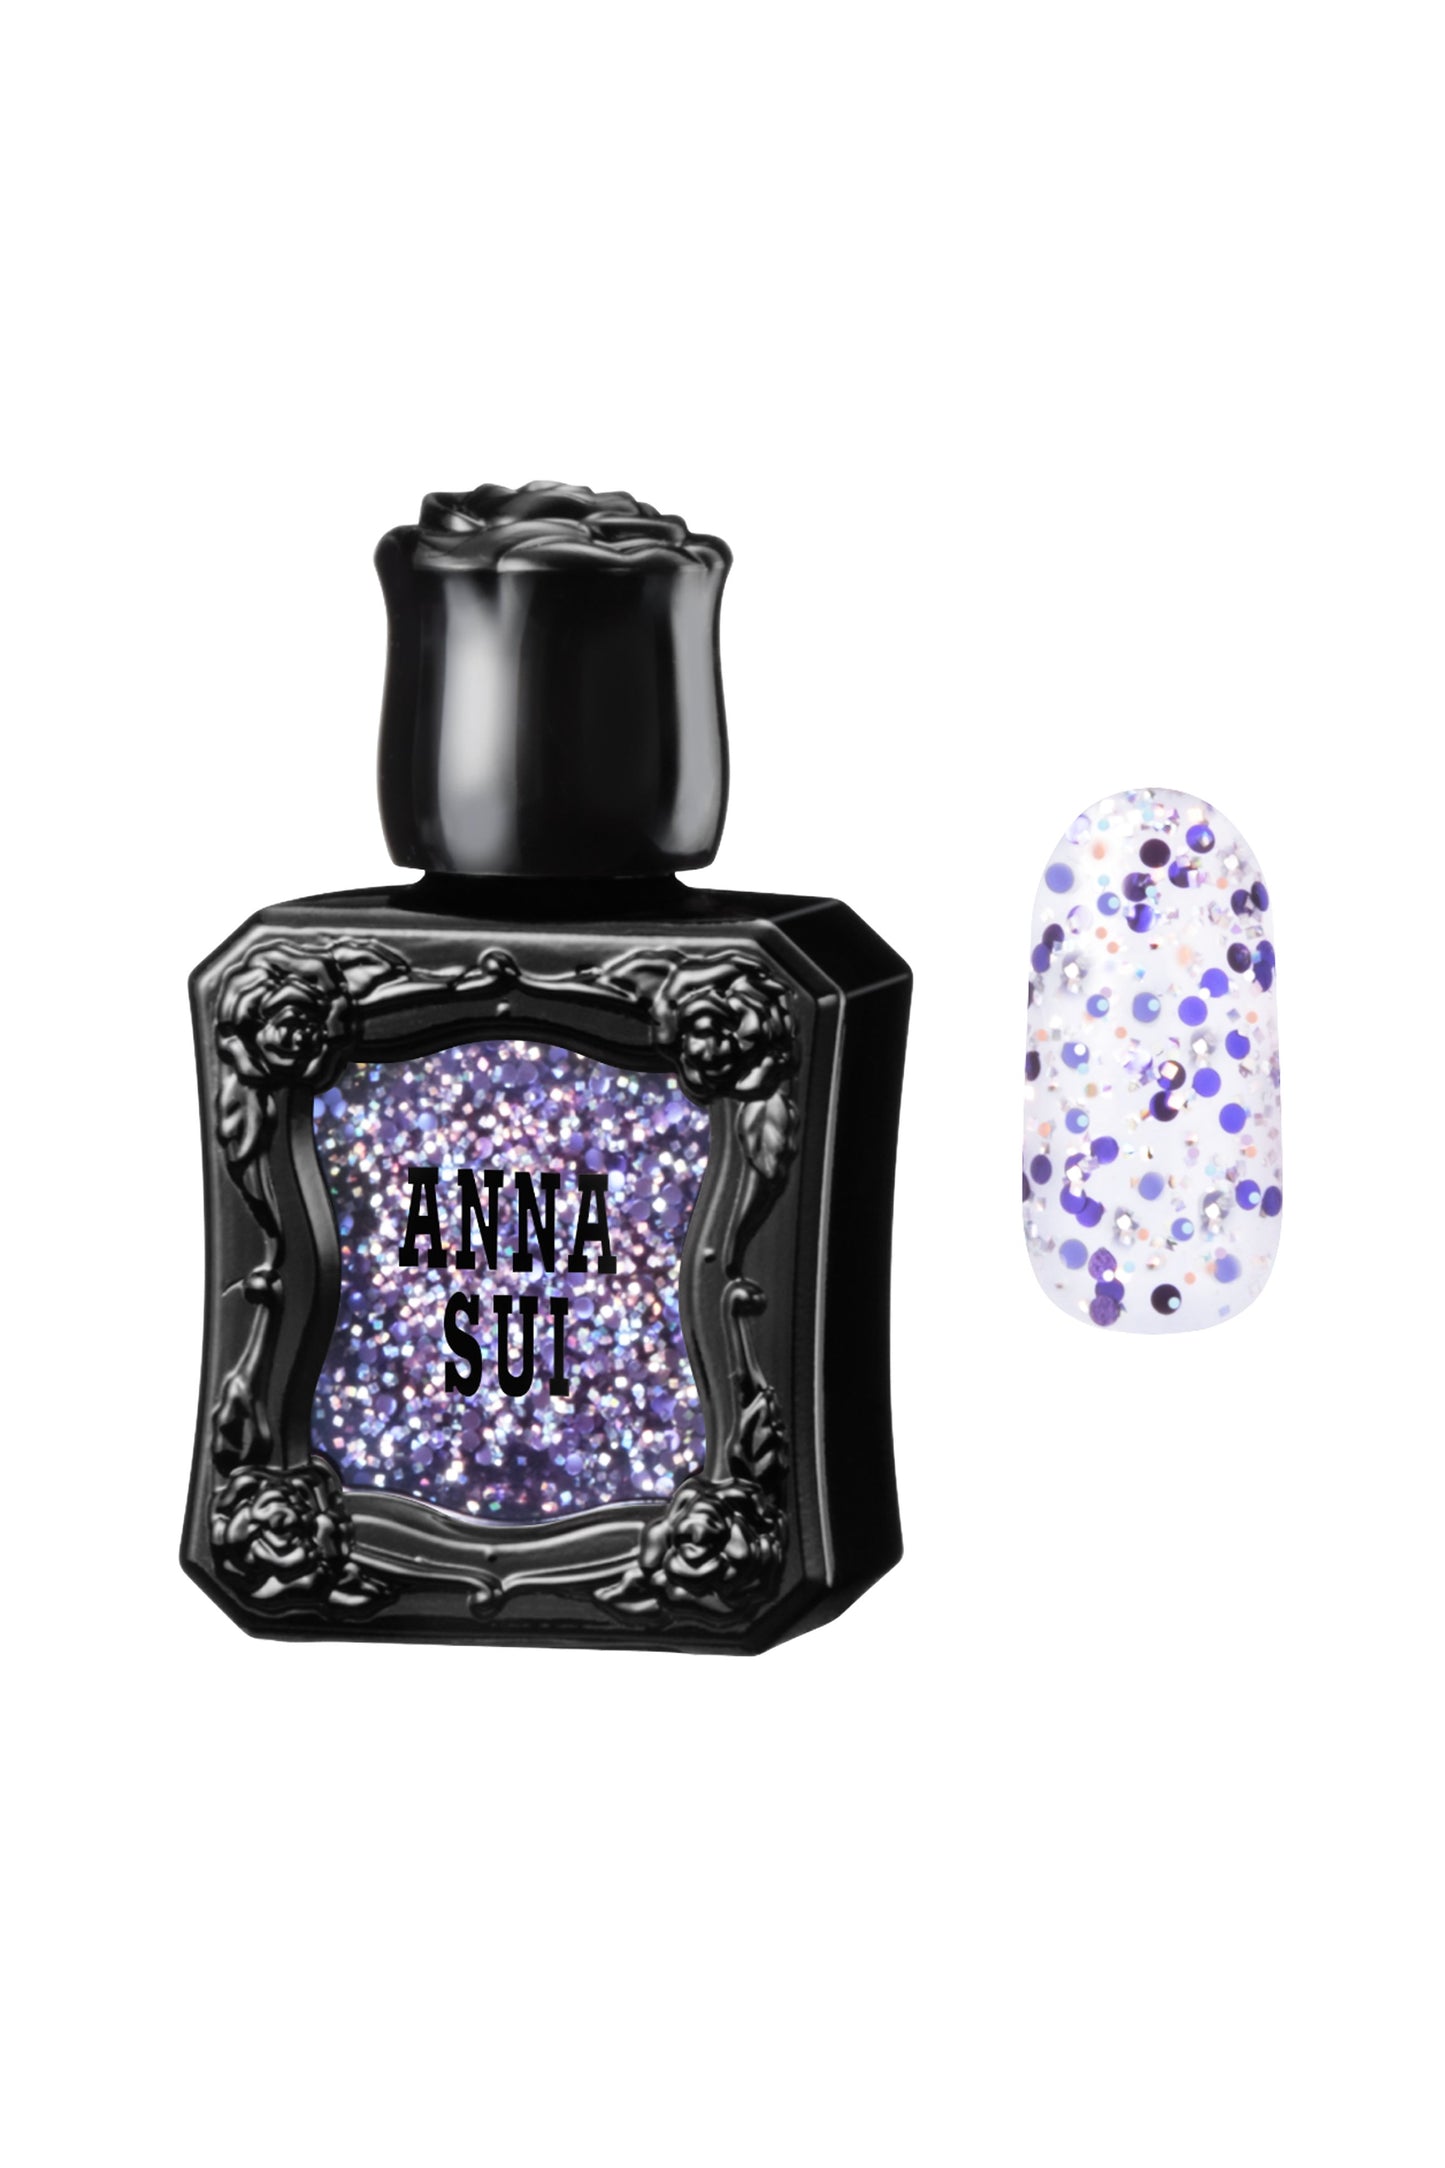 Black container with raised rose pattern, Anna Sui on Purple Punch